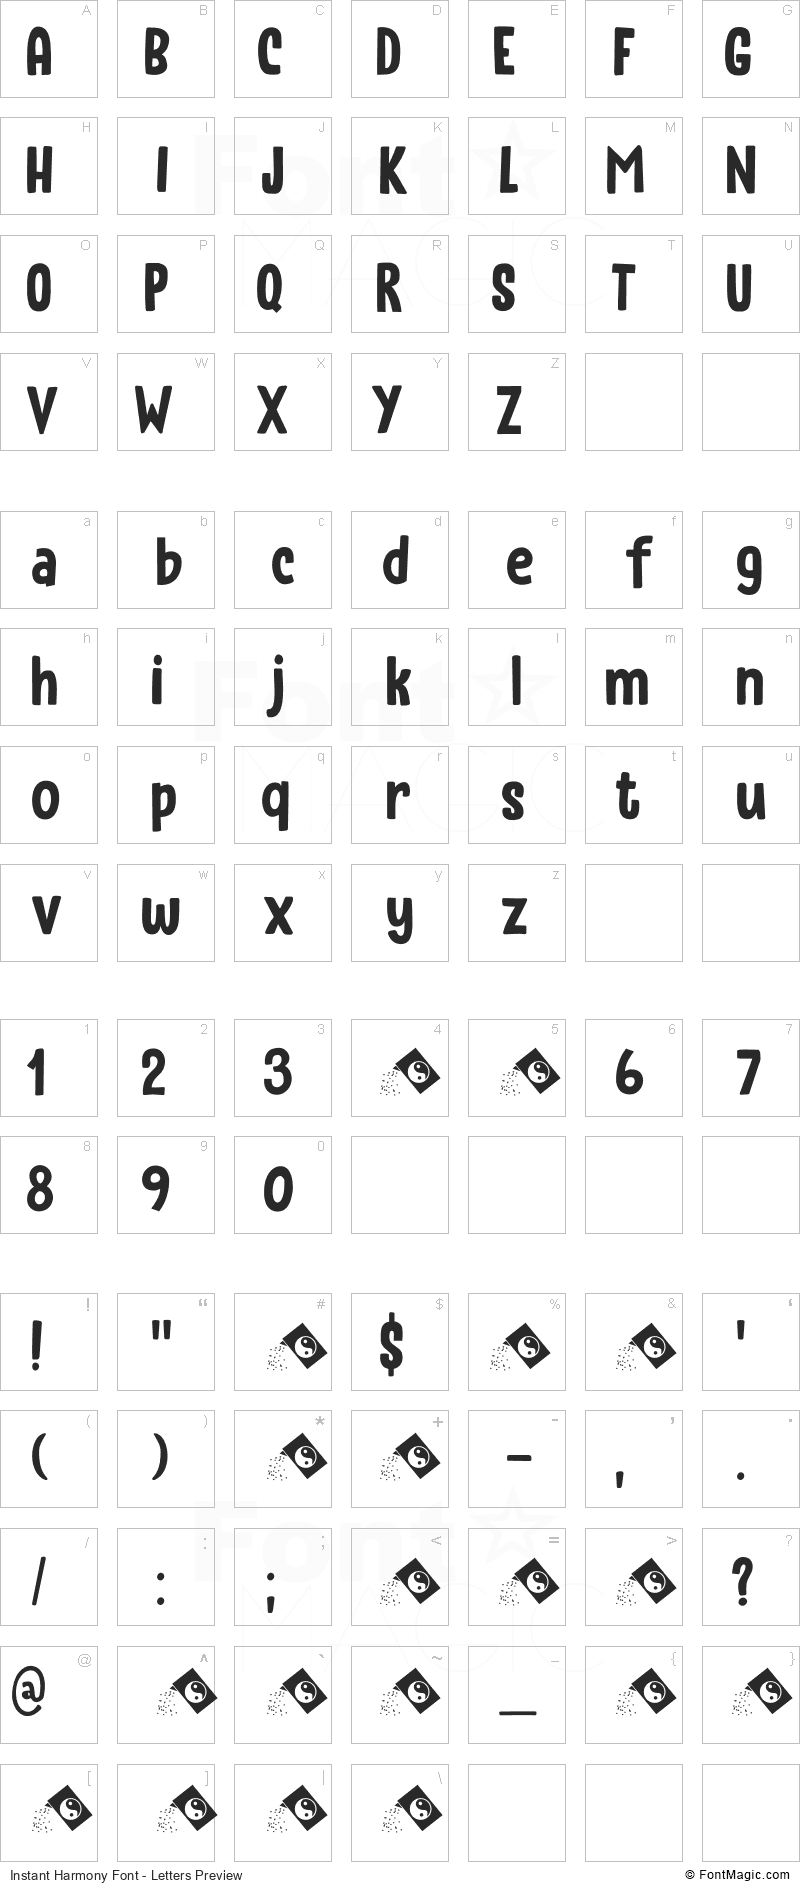 Instant Harmony Font - All Latters Preview Chart